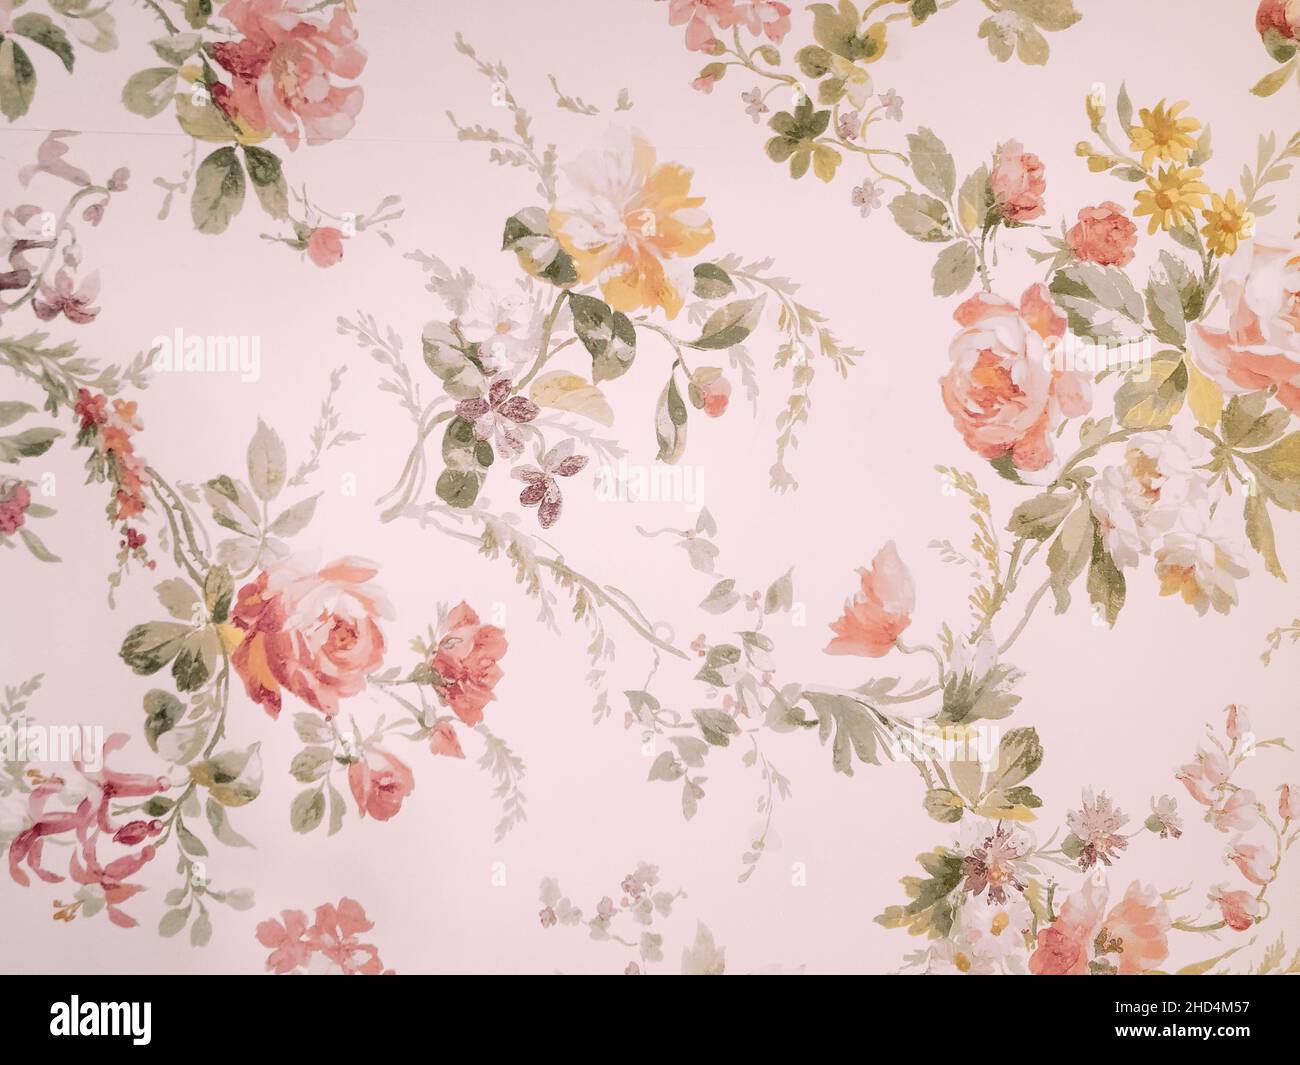 1563731 Old Fashioned Wallpaper Images Stock Photos  Vectors   Shutterstock